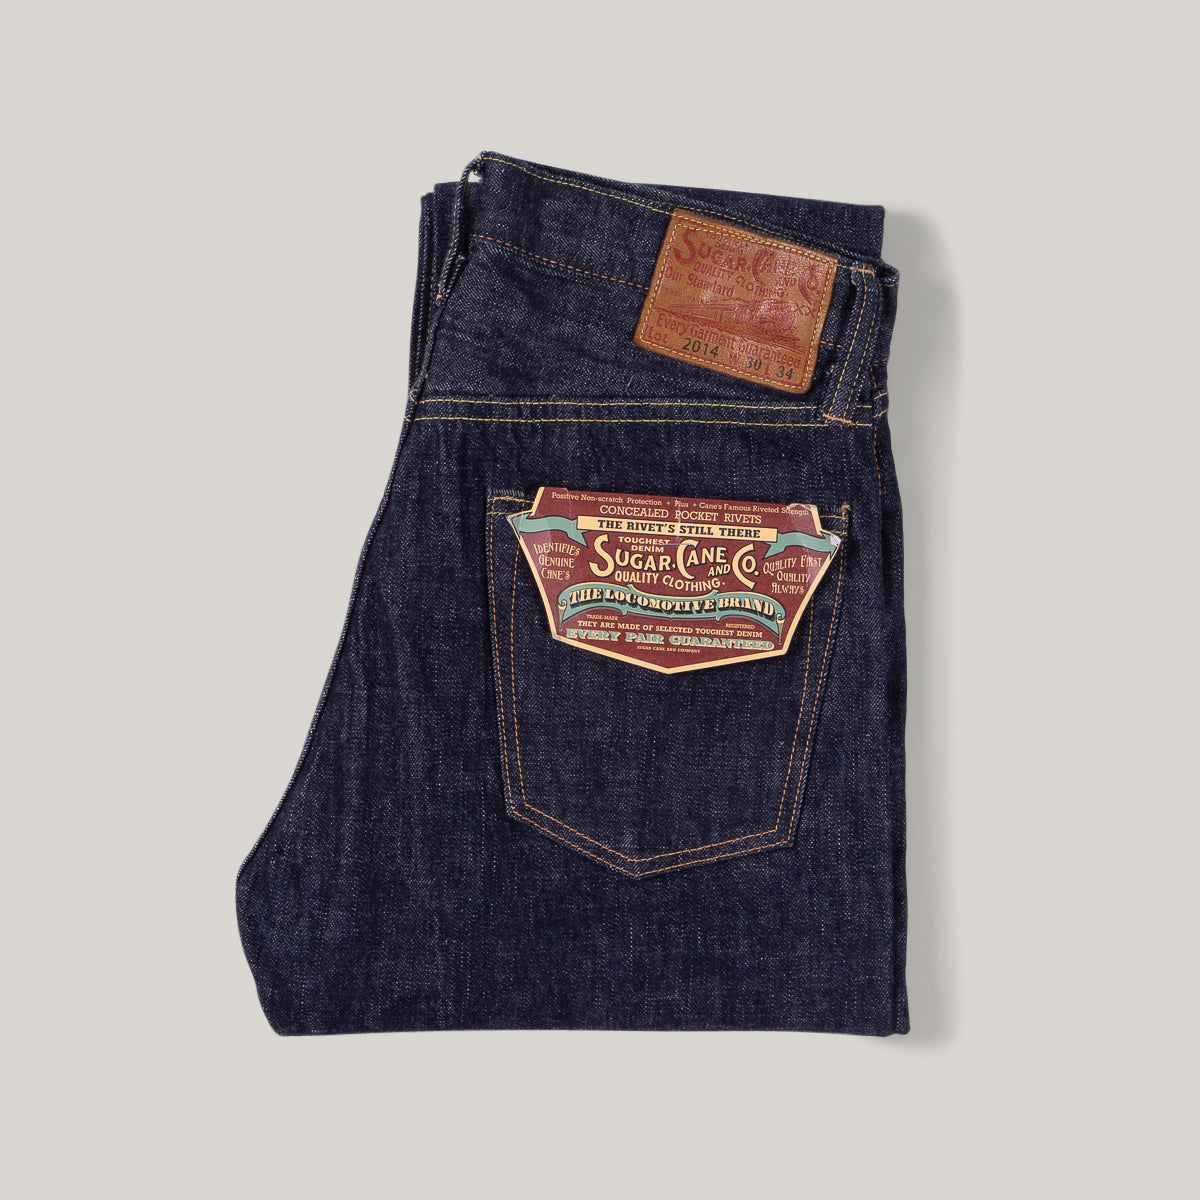 SUGAR CANE TYPEIII 1947 JEANS - SLIM FIT – Pickings and Parry